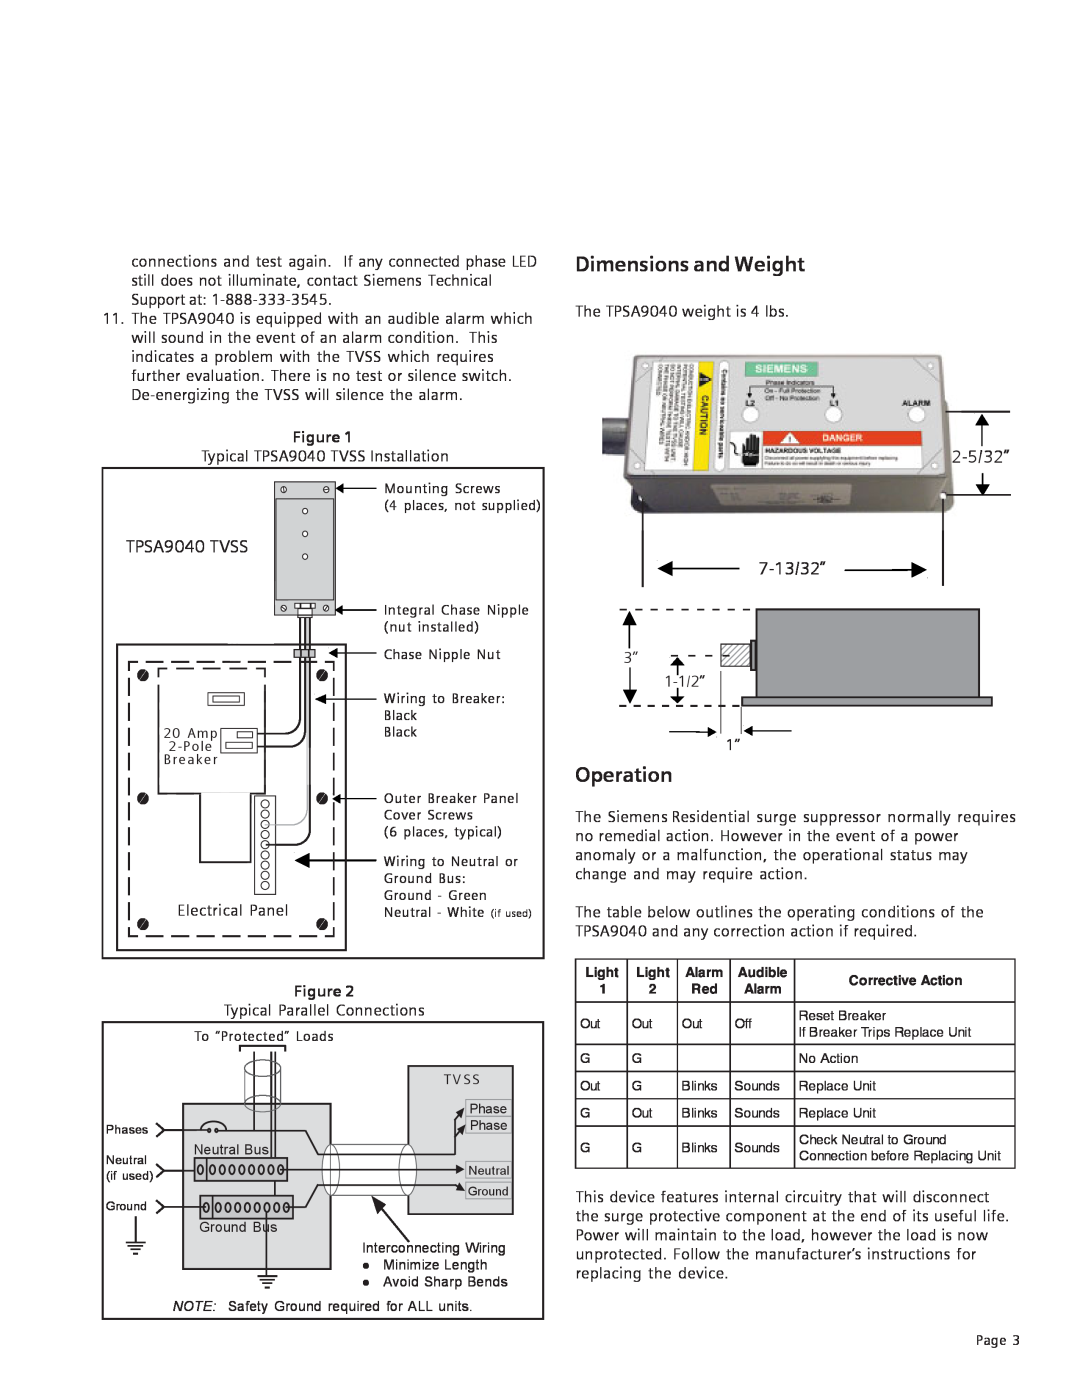 Siemens user manual Dimensions and Weight, Operation, 2-5/32”, TPSA9040 TVSS, 7-13/32” 